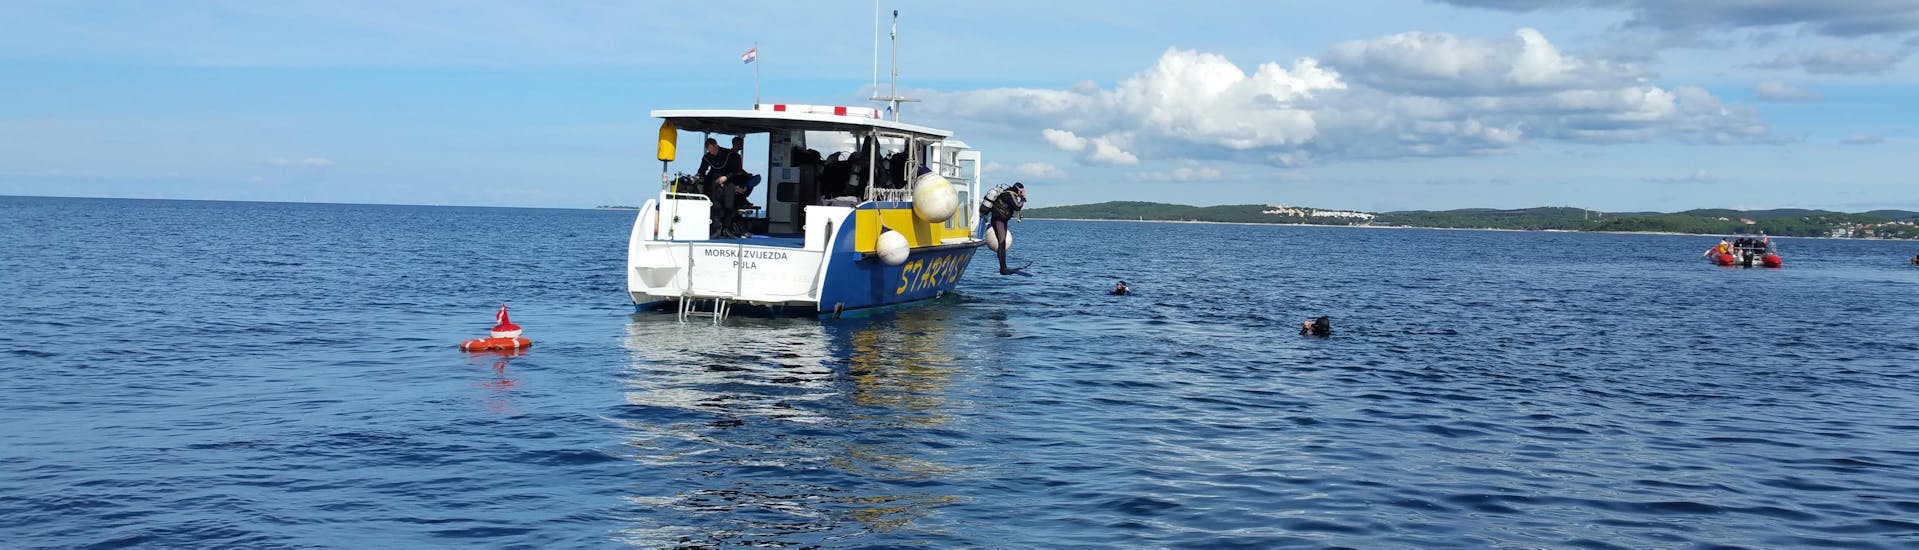 PADI Upgrade to Open Water Diver Course in Vrsar.